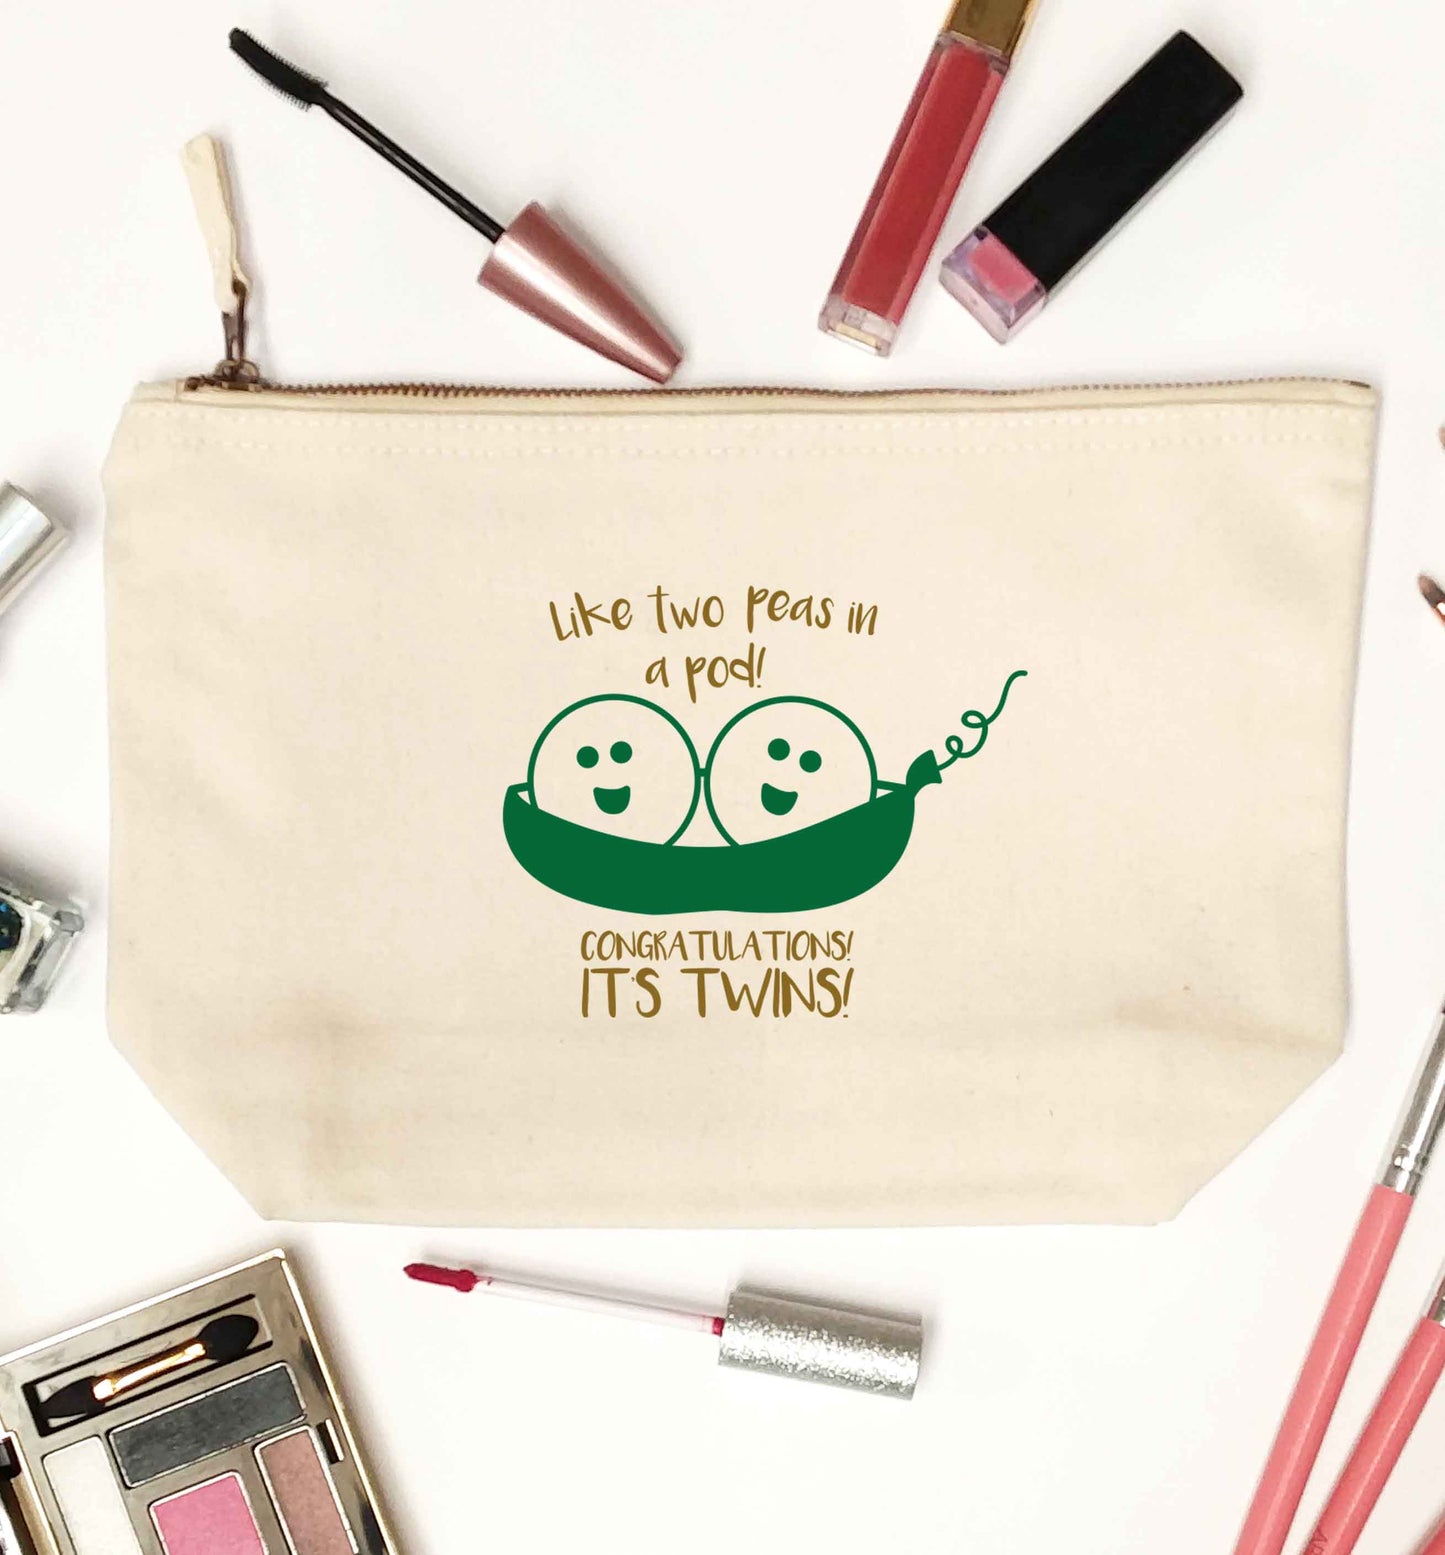 Like two peas in a pod! Congratulations it's twins! natural makeup bag